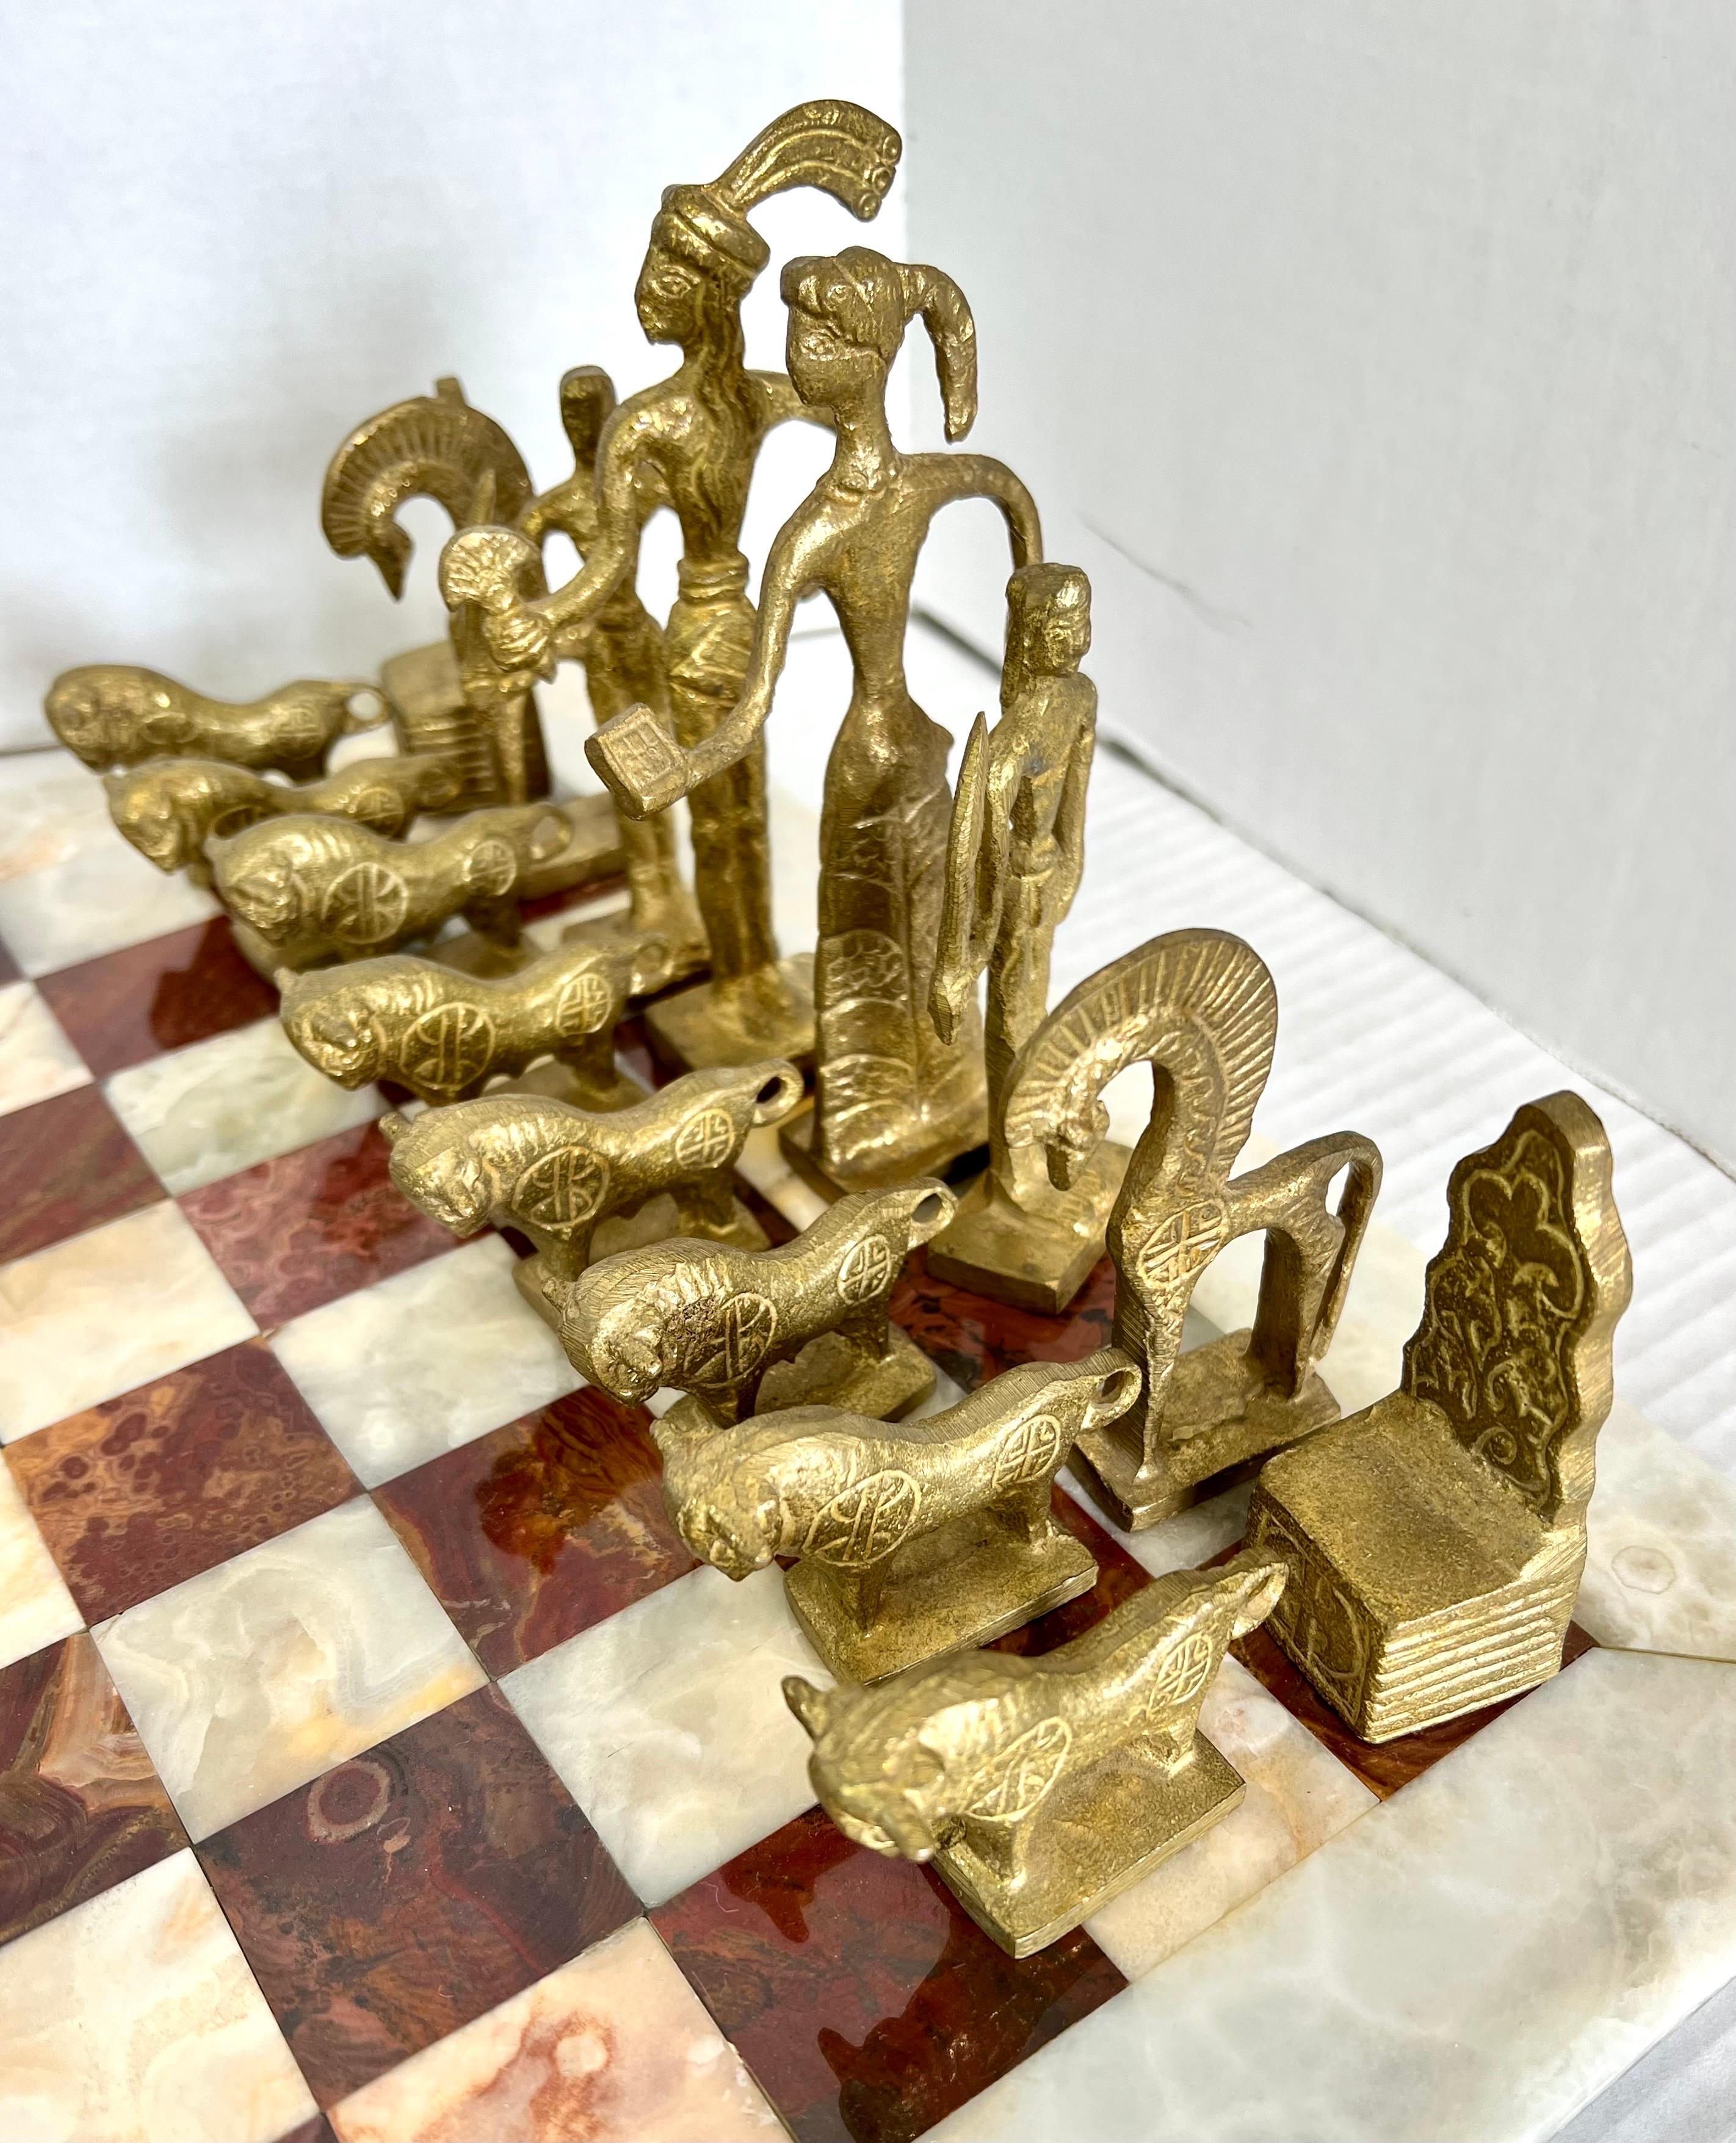 20th Century Vintage Marble Chess Set with Brutalist Carved Bronze and Brass Figurines